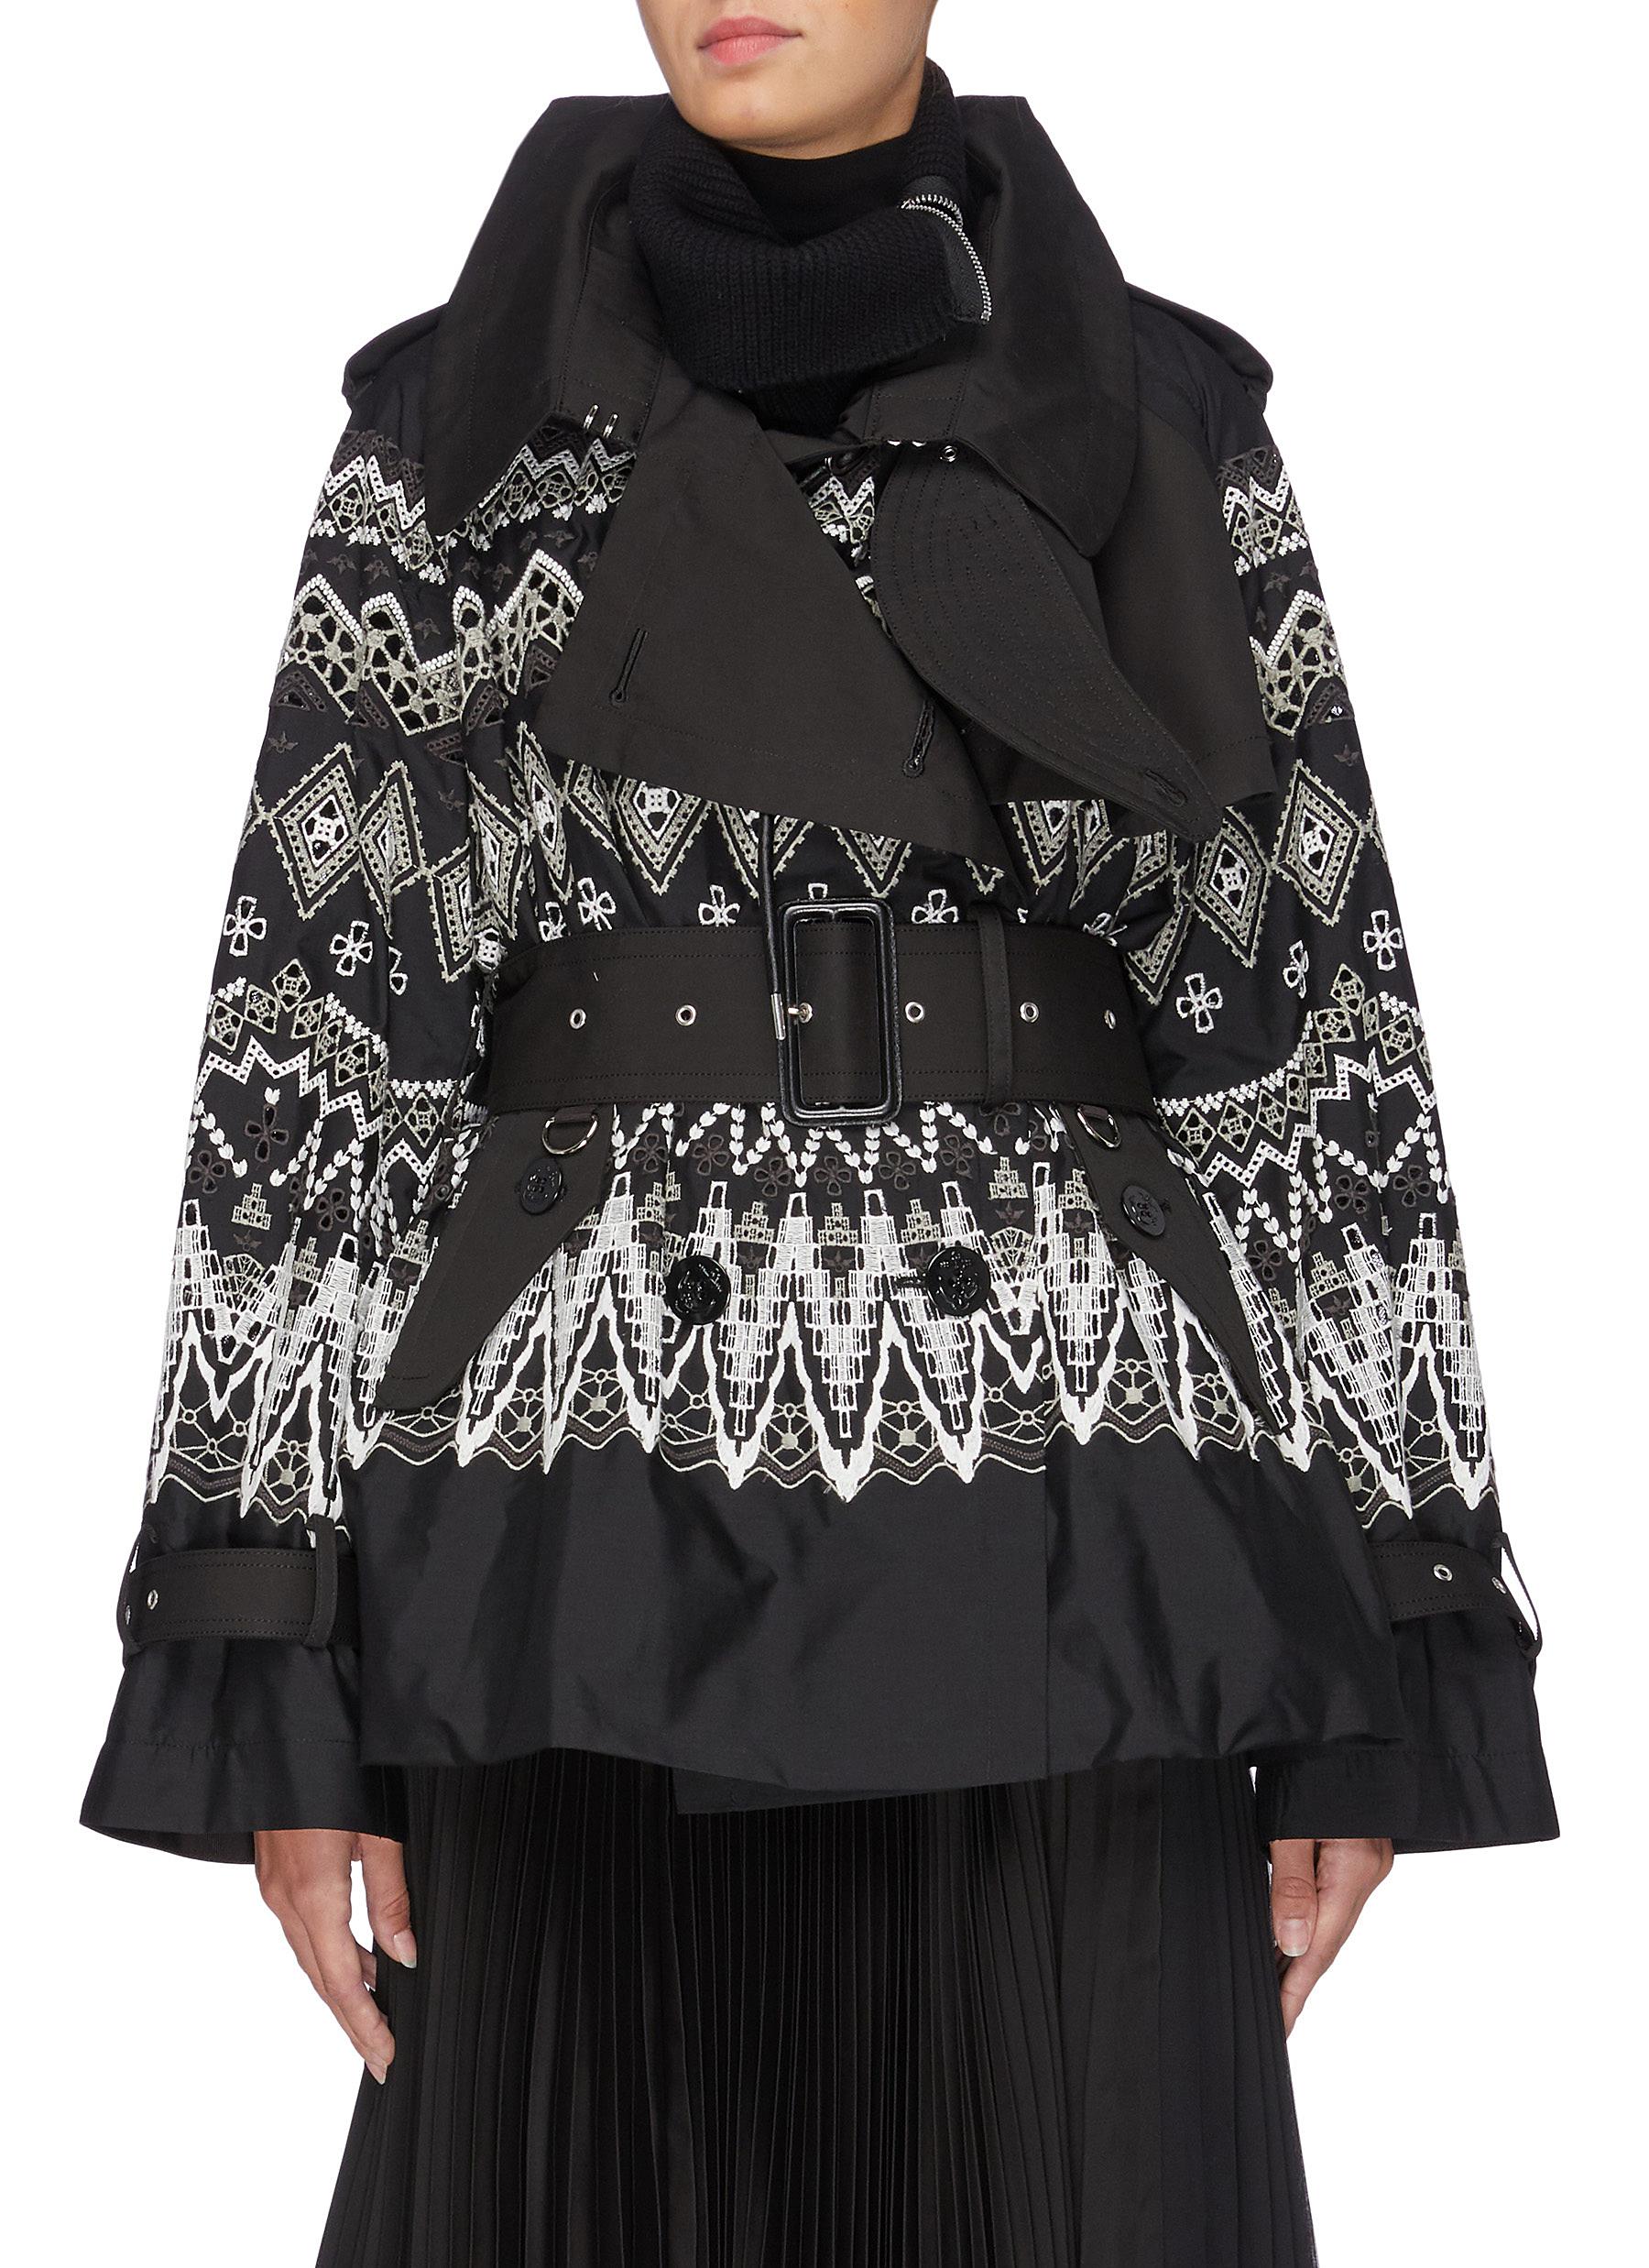 Belted Fair Isle embroidered flared jacket by Sacai